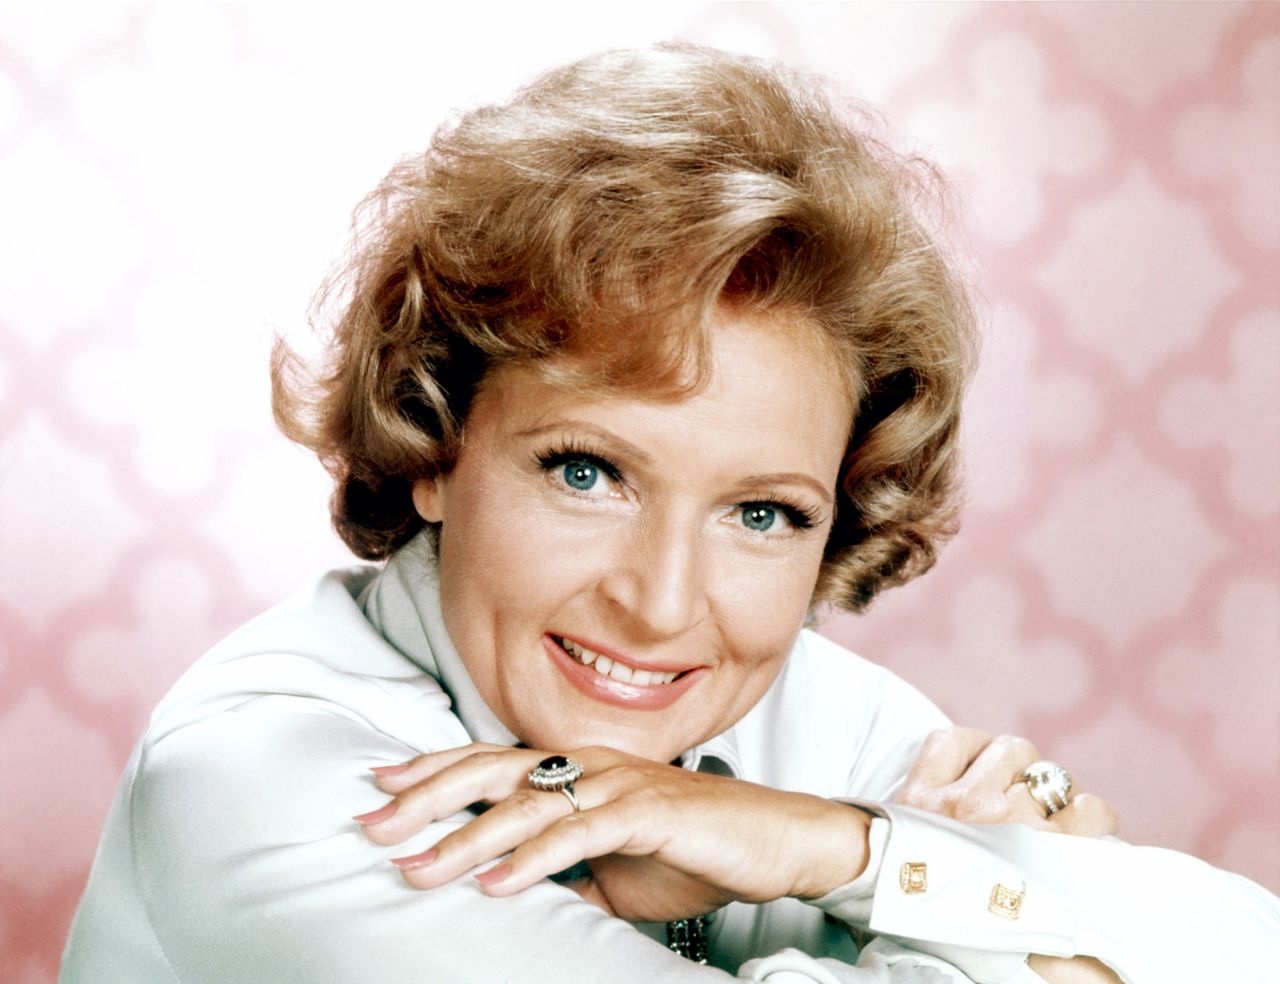 After her success on "The Mary Tyler Moore Show," White starred in her own series, "The Betty White Show," in 1977-78.